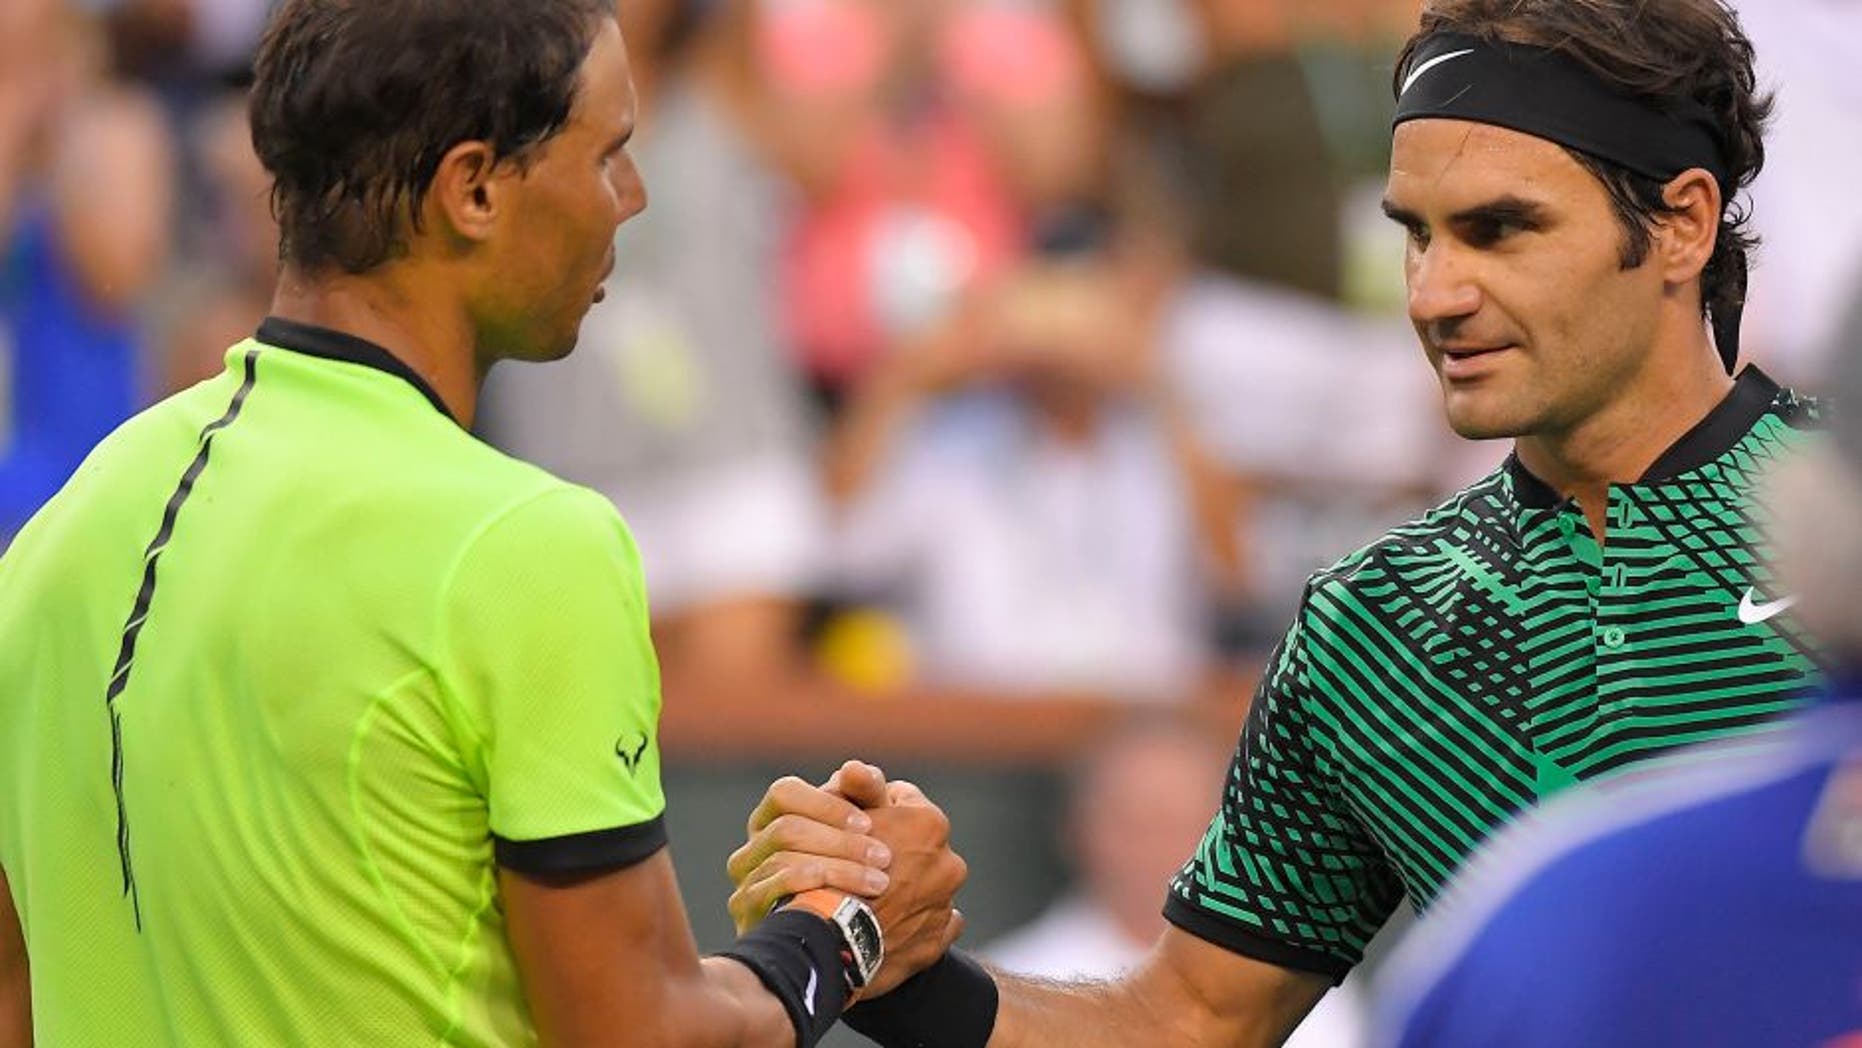 Roger Federer blasted Rafa Nadal at Indian Wells. Is he changing their one-sided ...